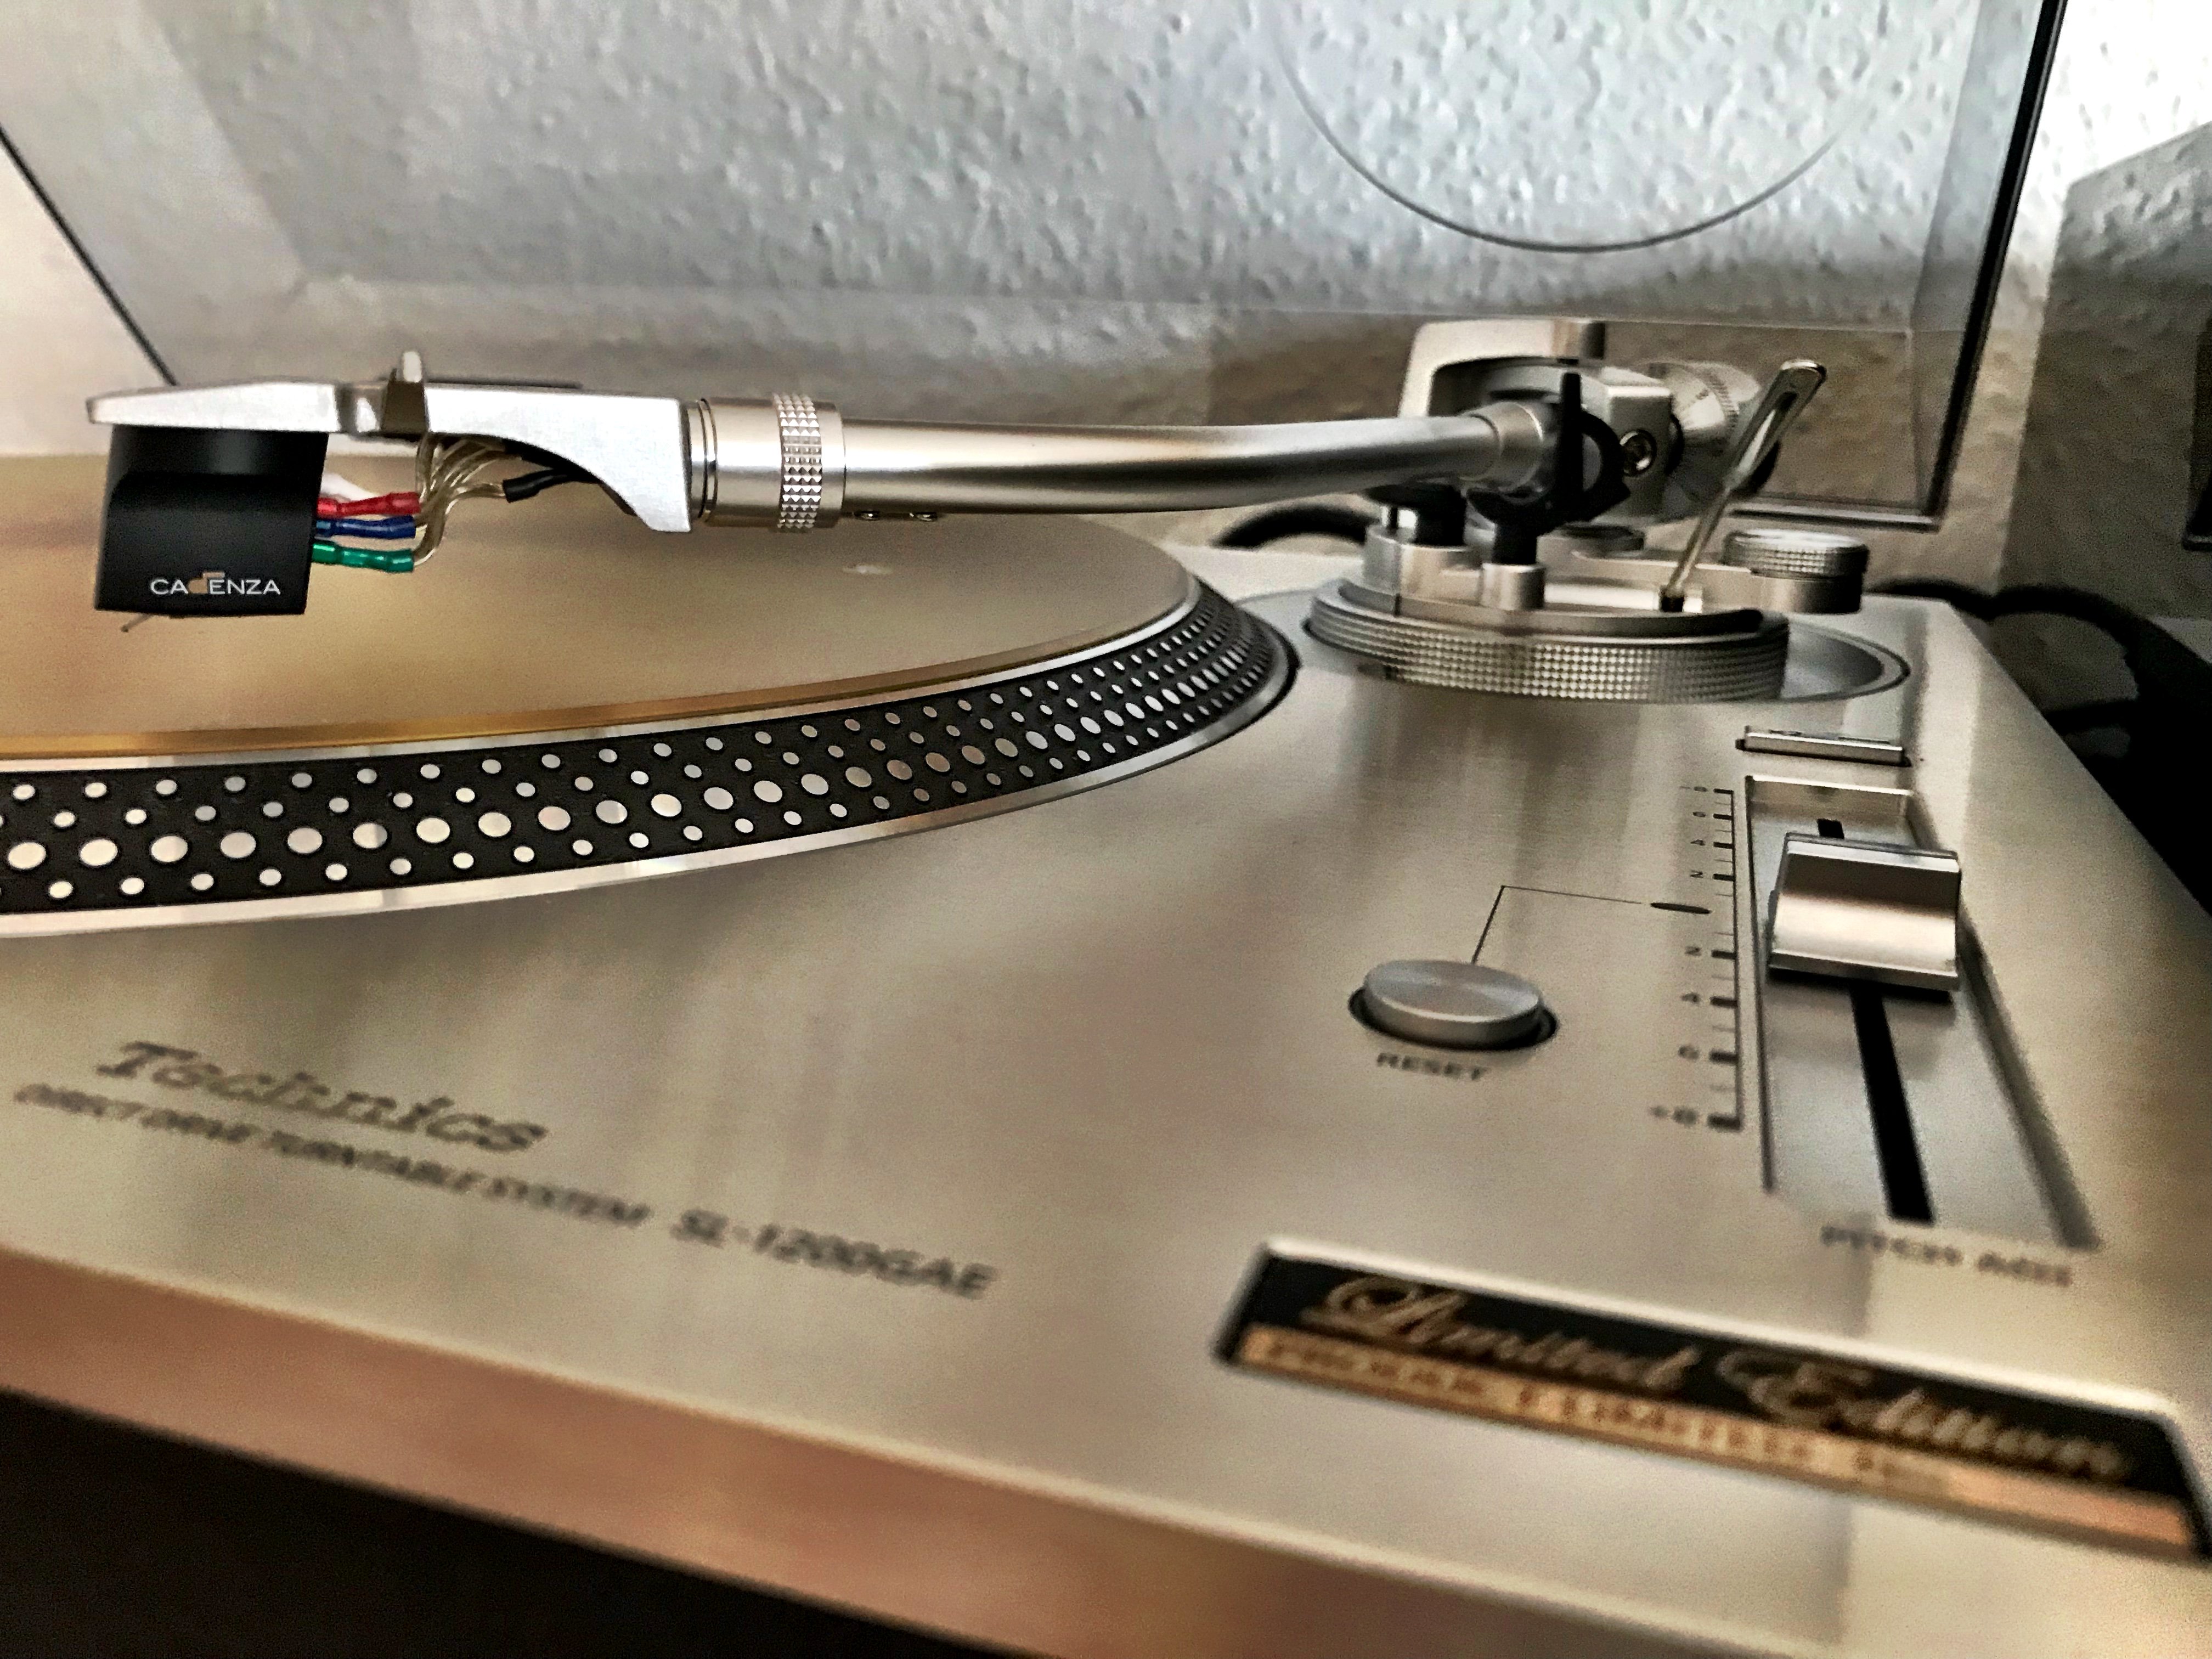 Ortofon on "Optically and technically created for each other: the Cadenza Bronze and the Technics SL-1200GAE https://t.co/2VsGsqeOWn" / Twitter